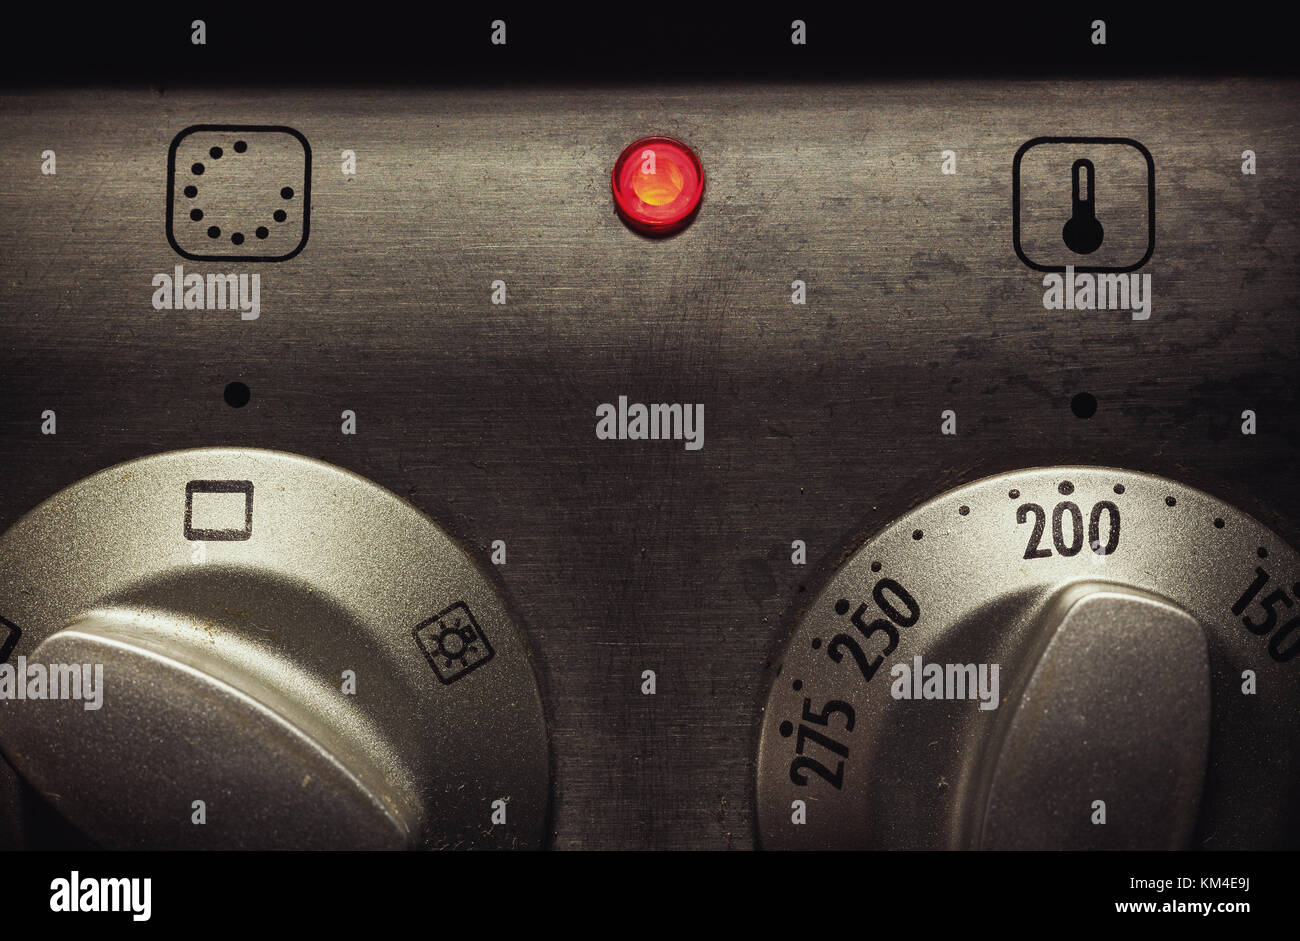 Closeup view on oven control buttons for heat and temperature. Stock Photo